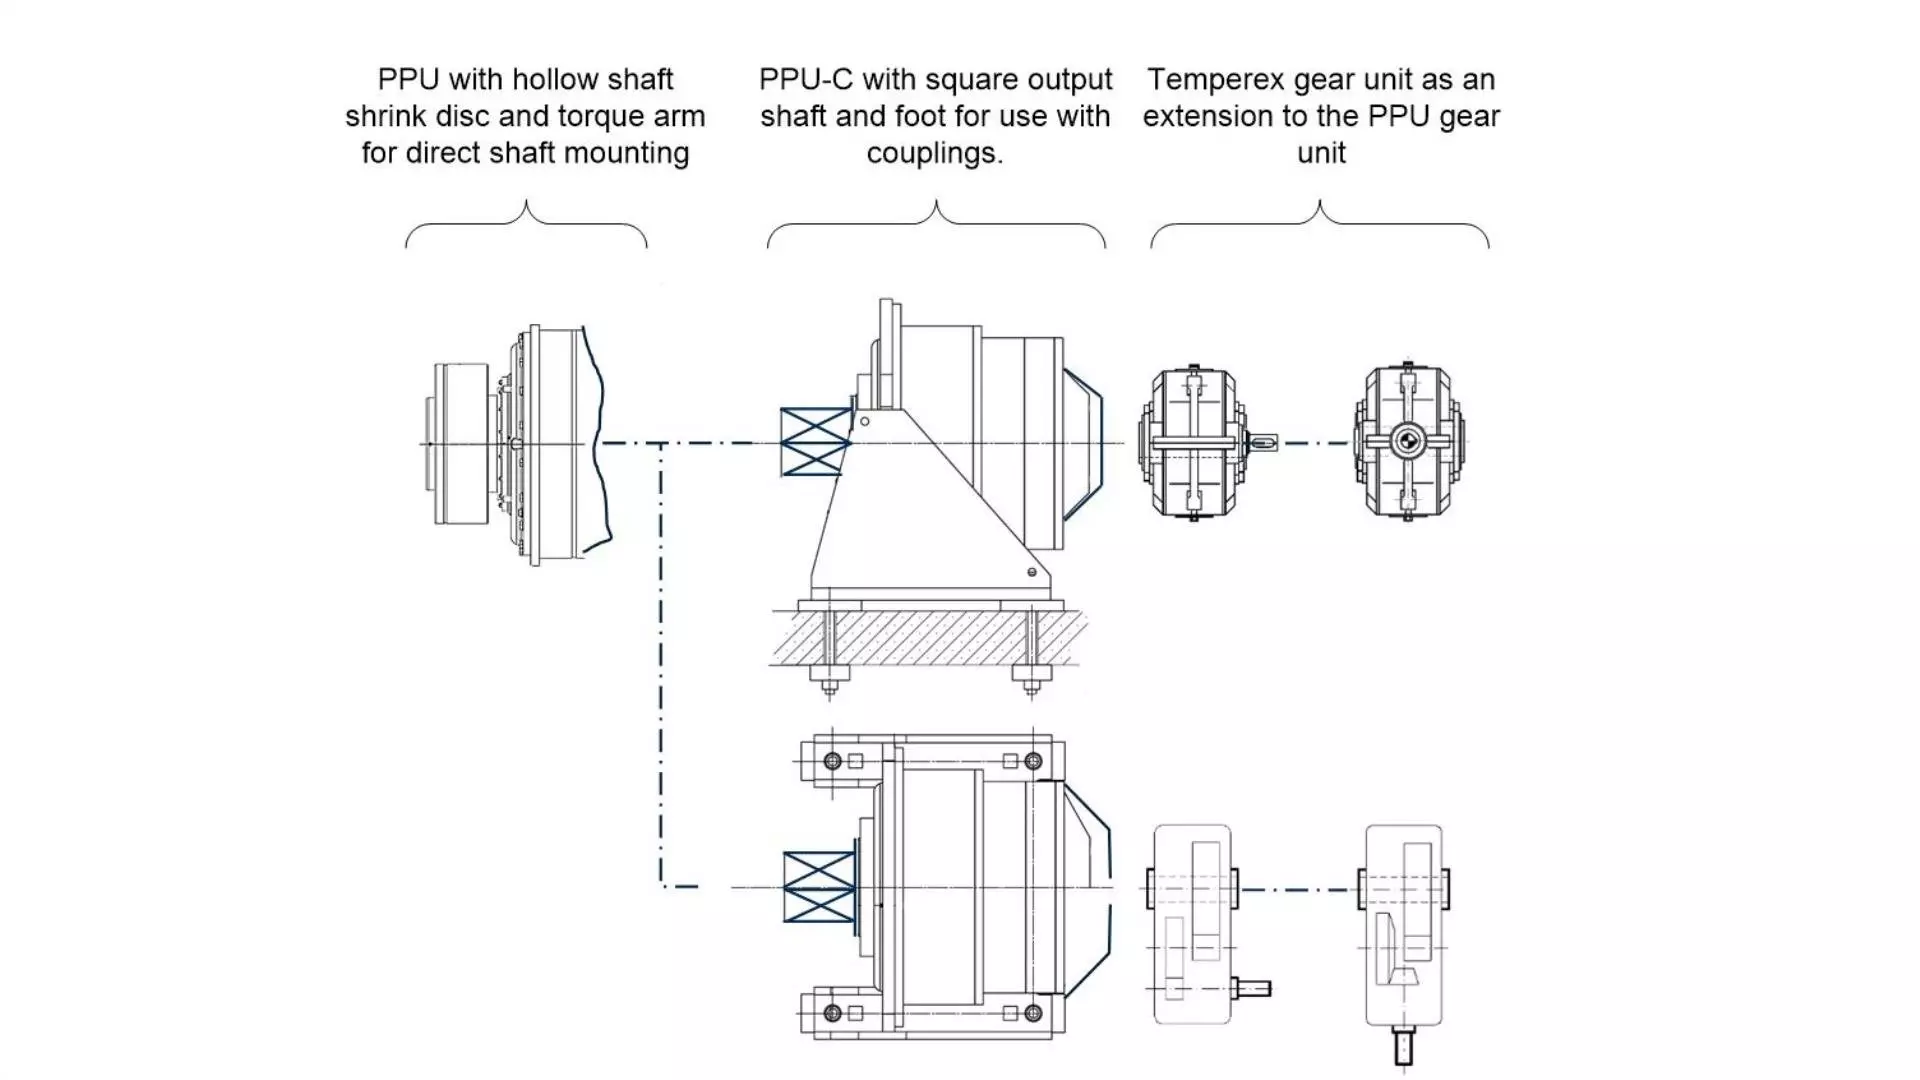 Schematics of MAAG® PPU / Temperex with it’s different options